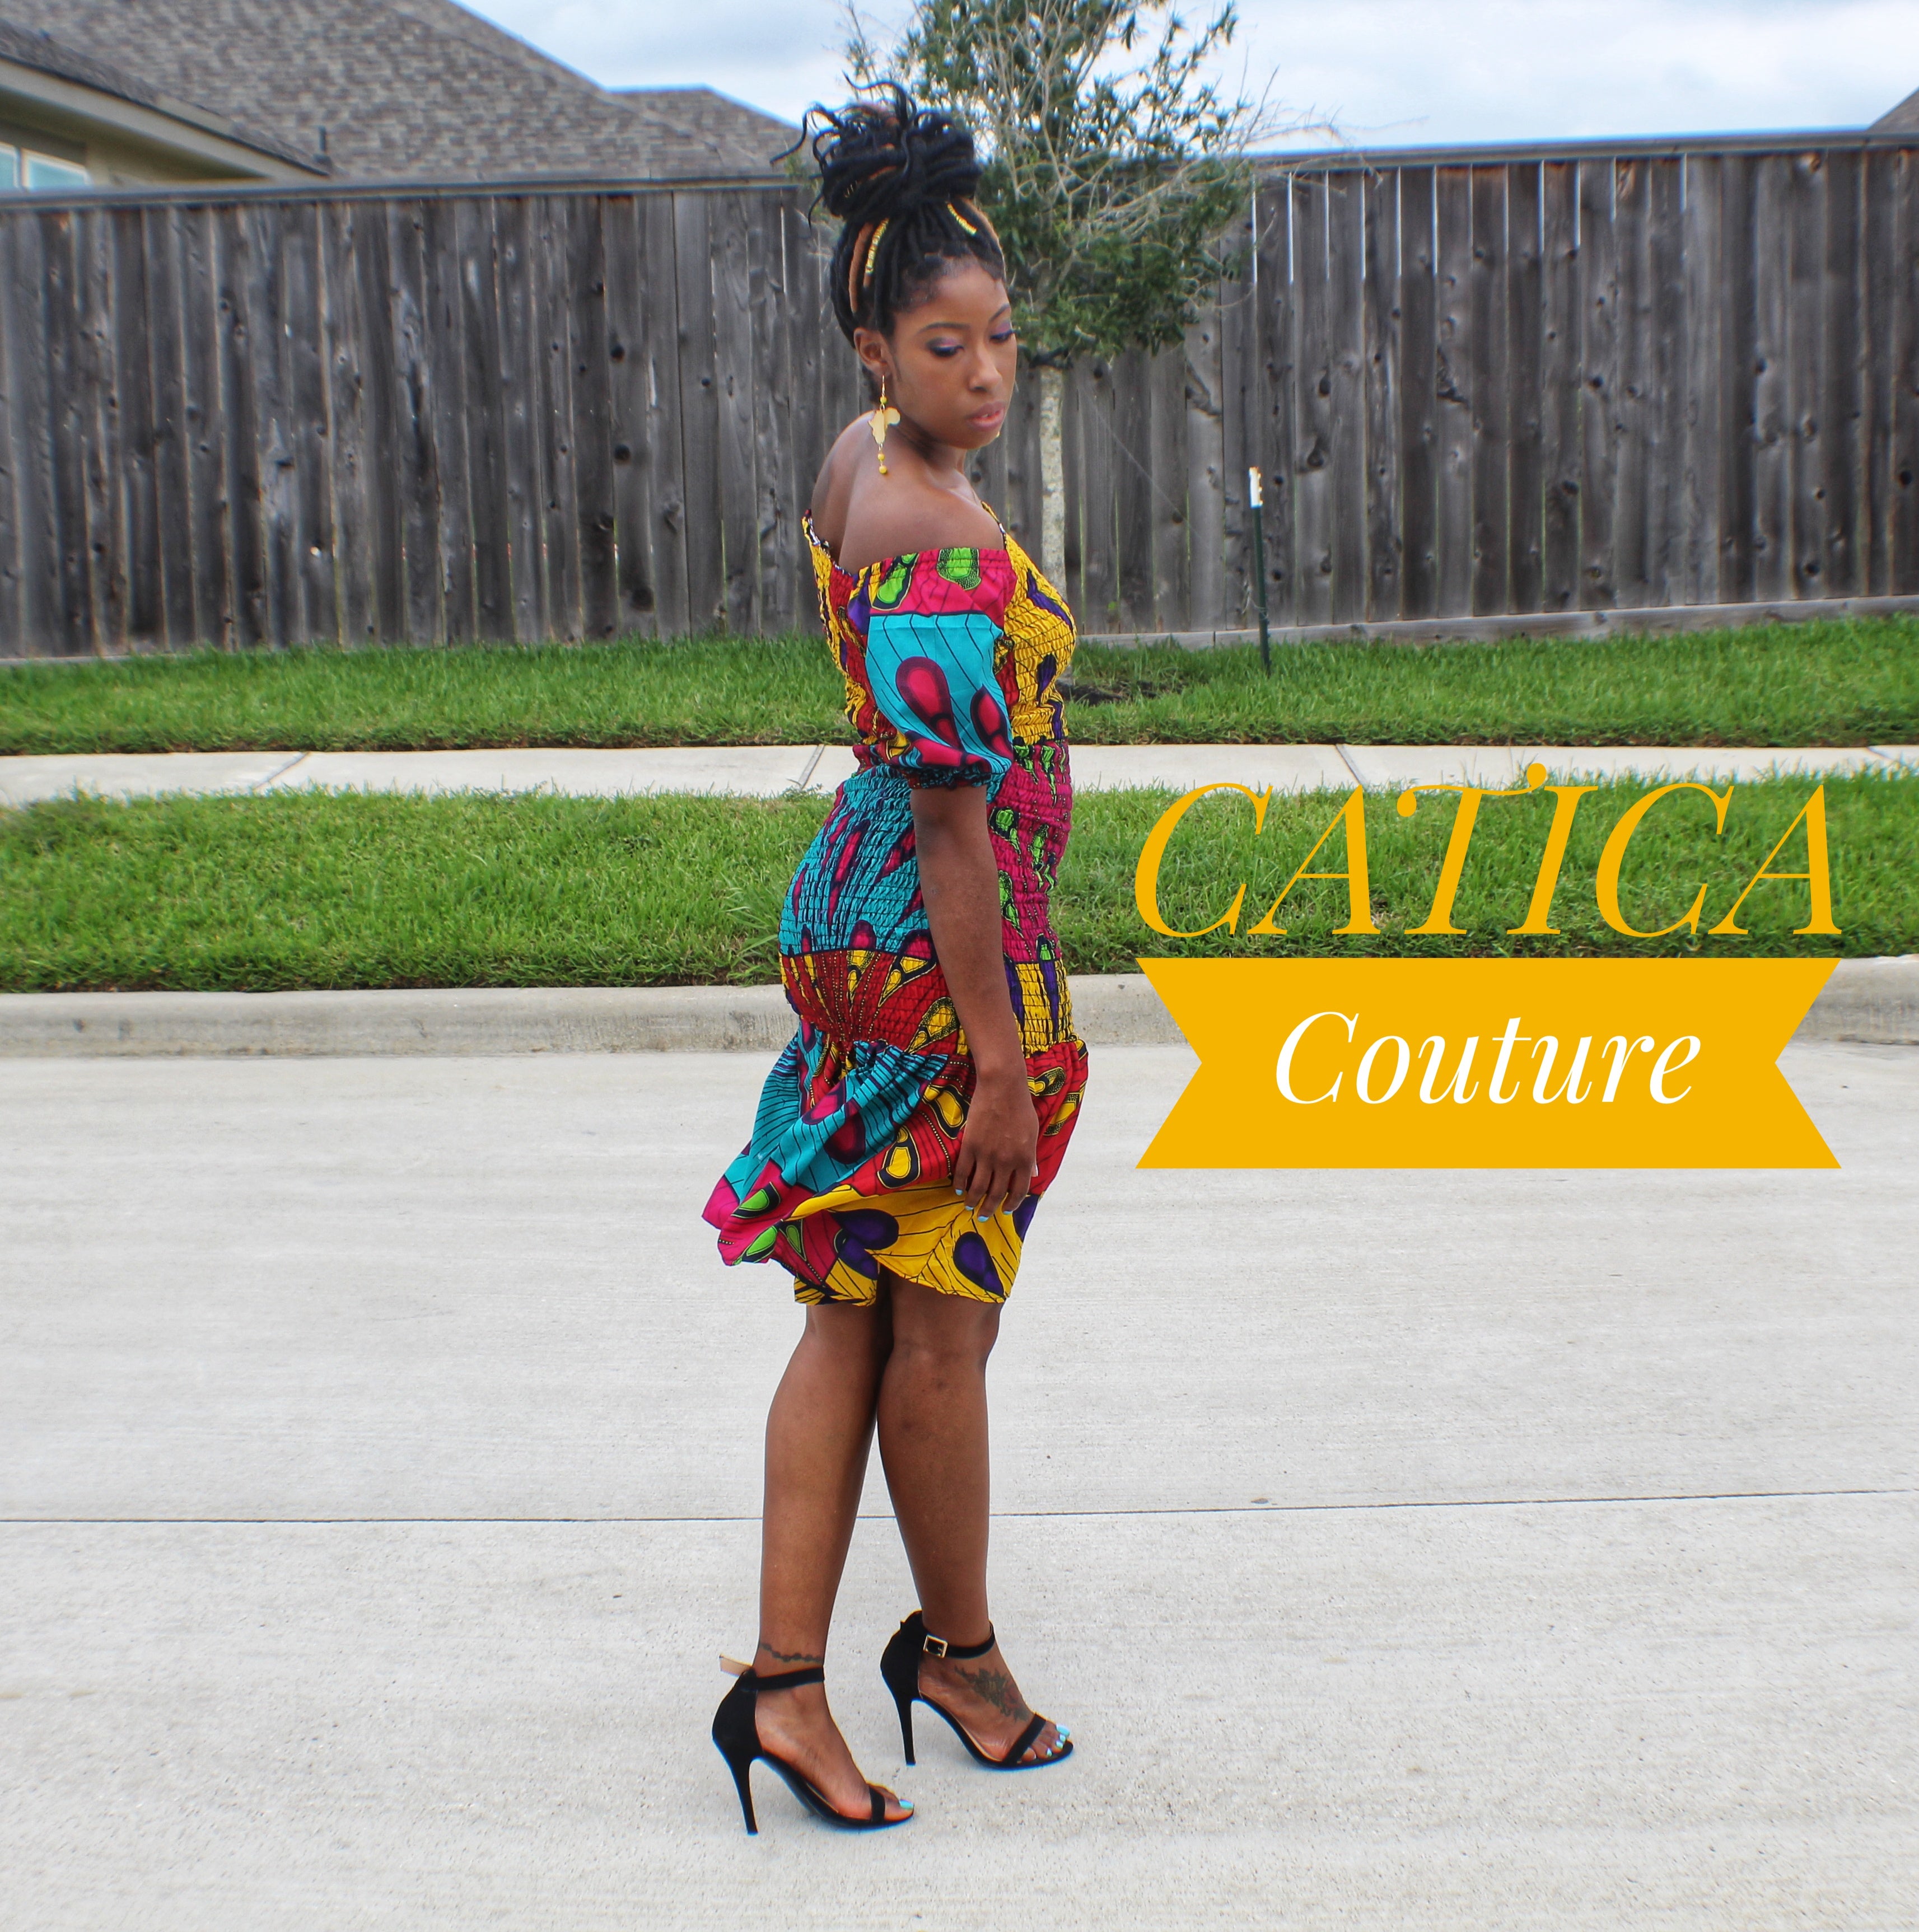 The Peacock Elastic Dress | CATICA Couture - CATICA Couture